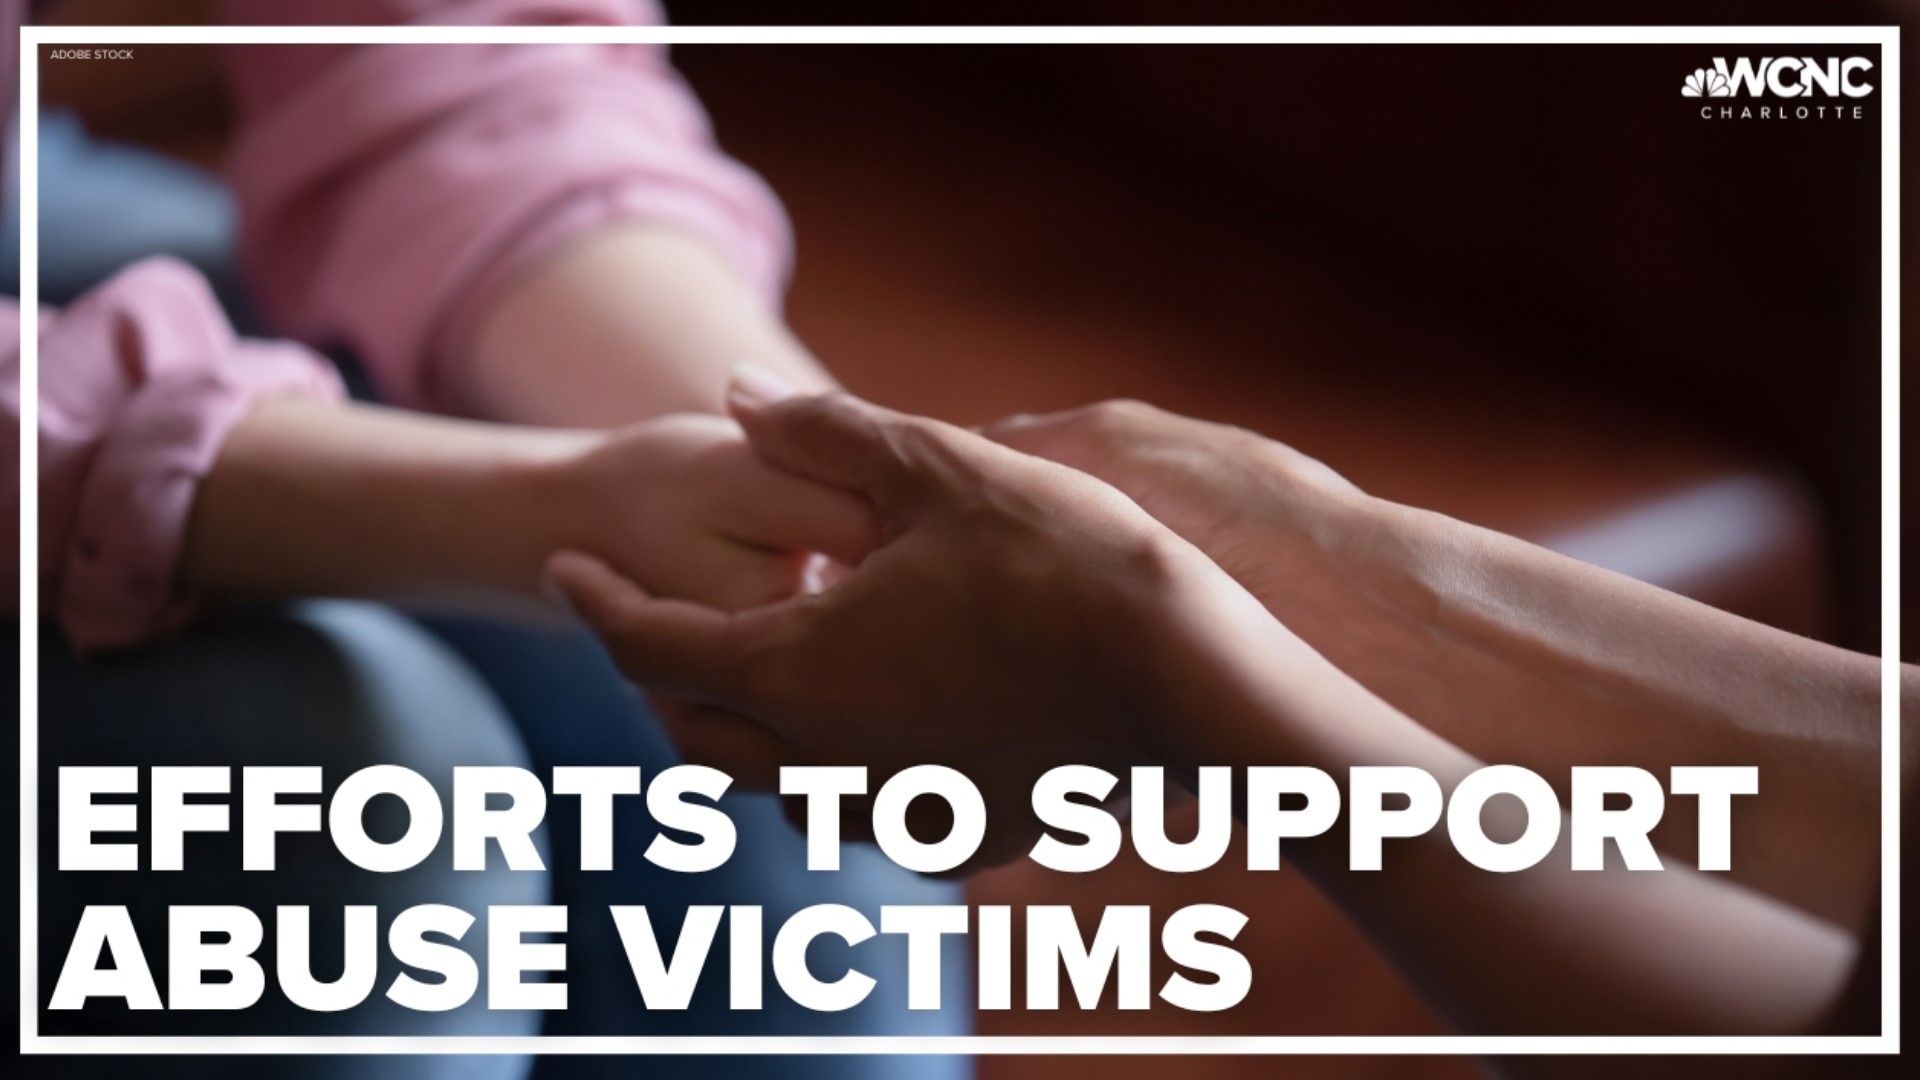 In Mecklenburg County, several nonprofits and community partners are working to bring their services together to better serve victims of violence and abuse.